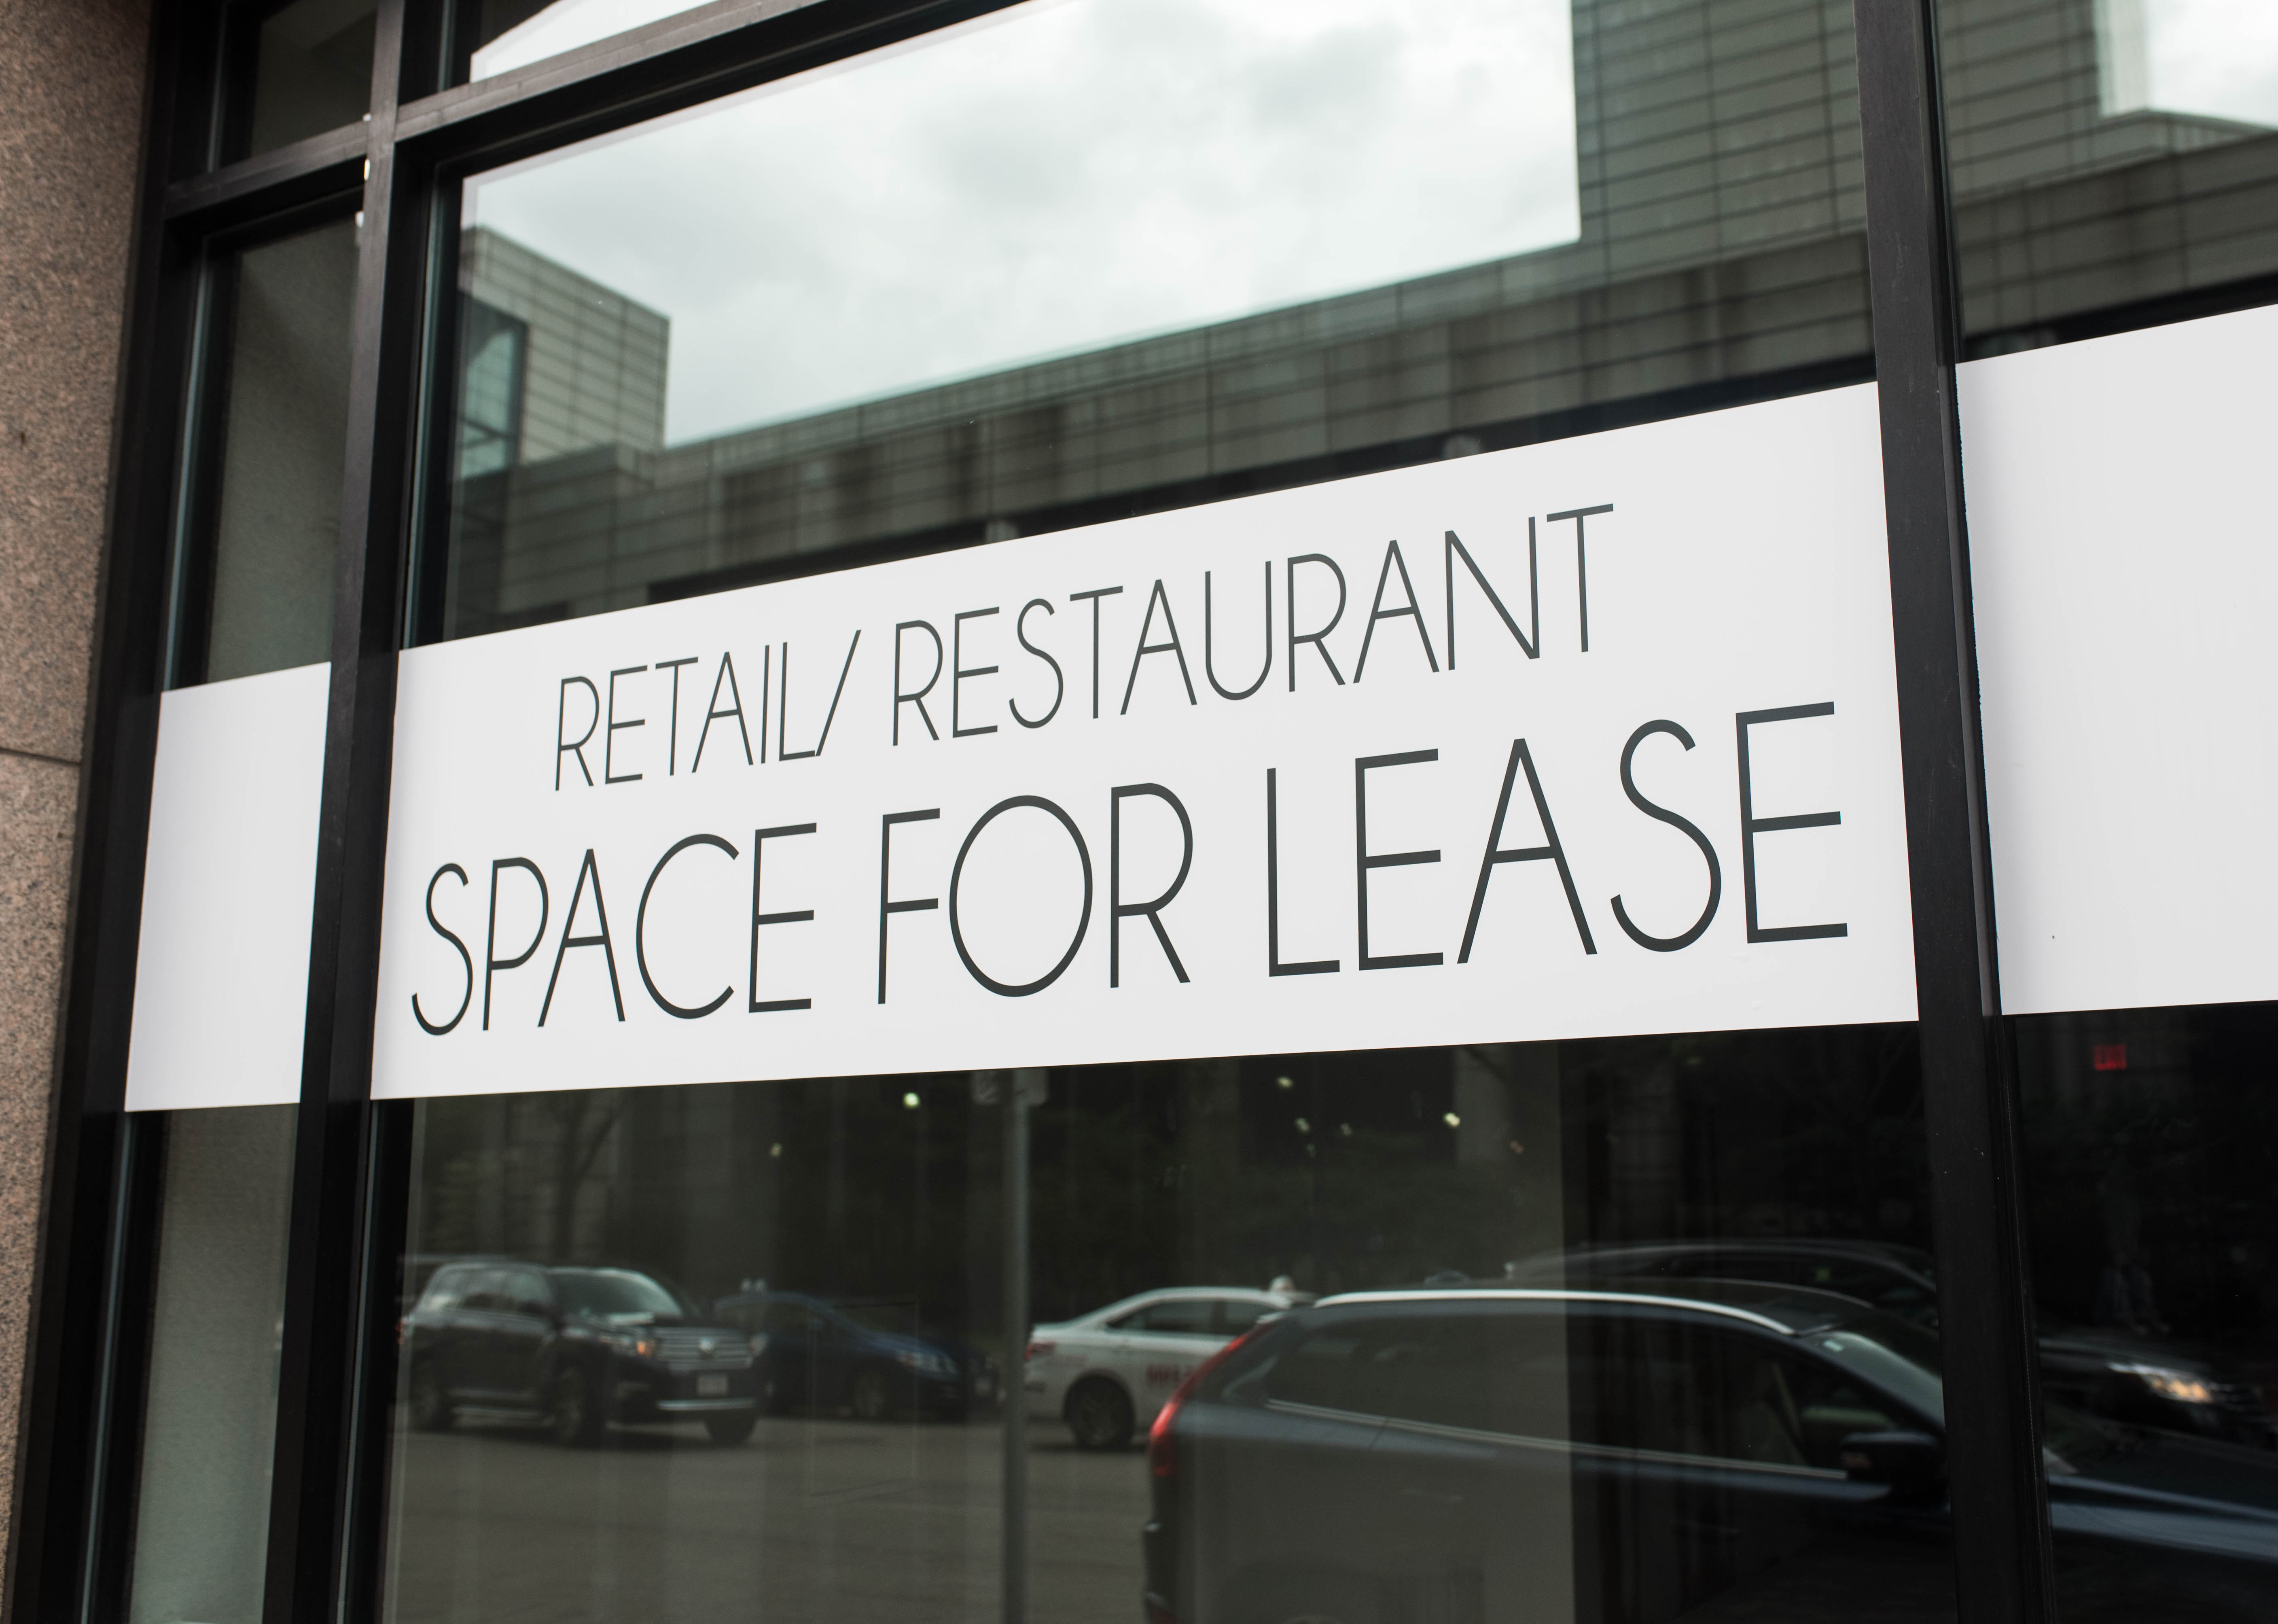 Retail Space for Lease window graphic 